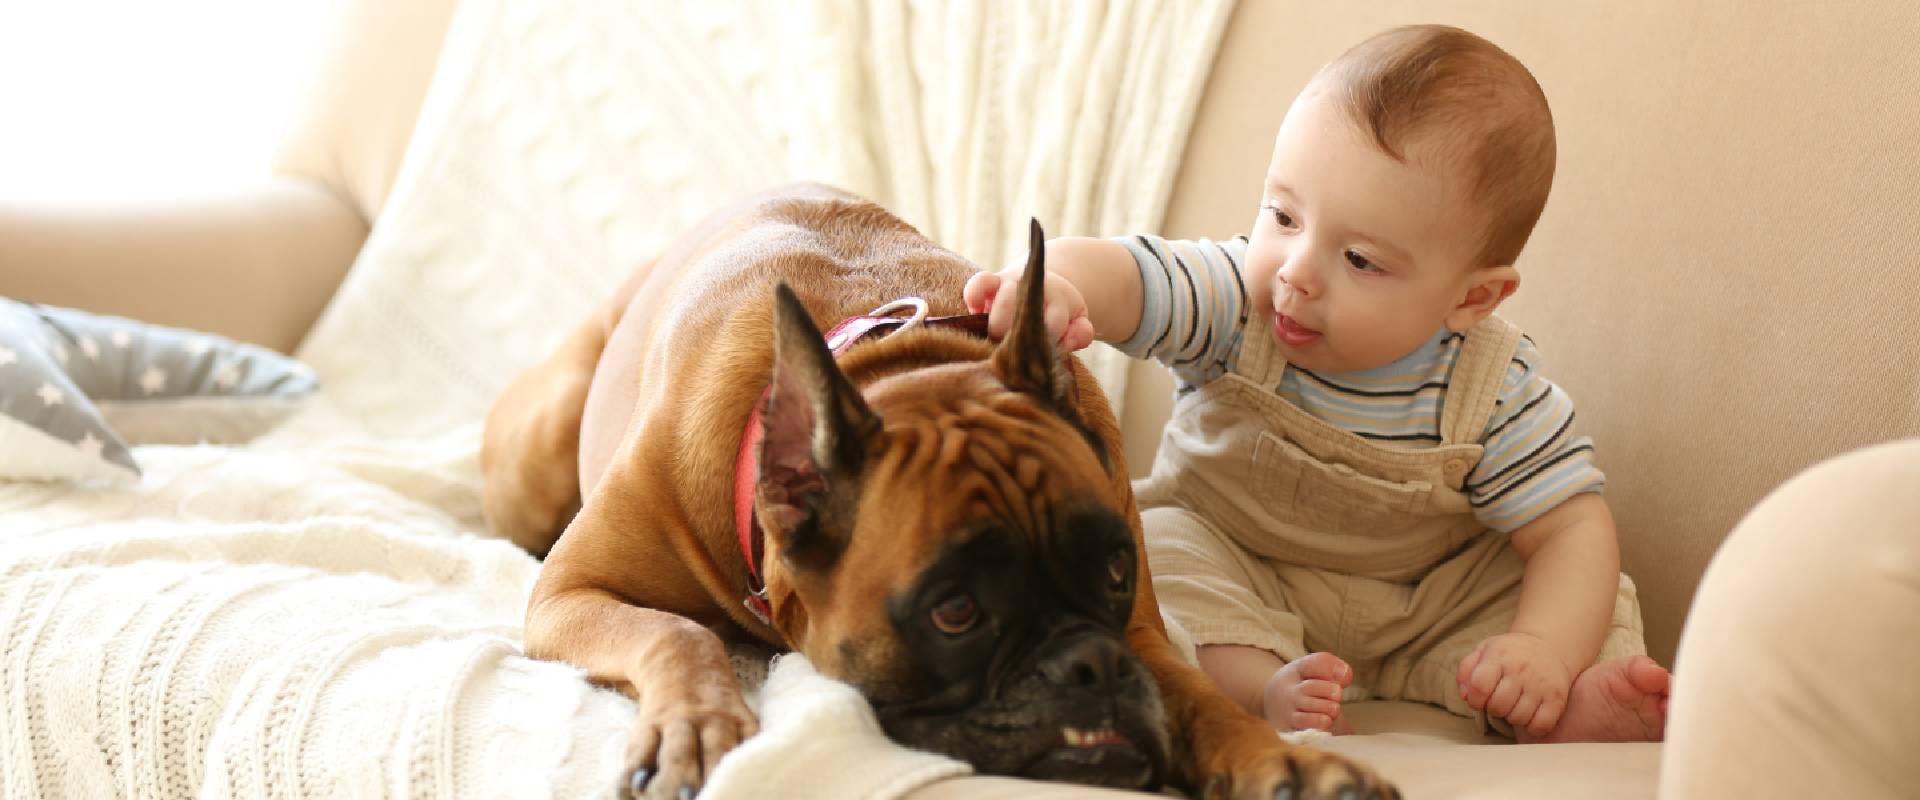 Toddler sitting with a dog